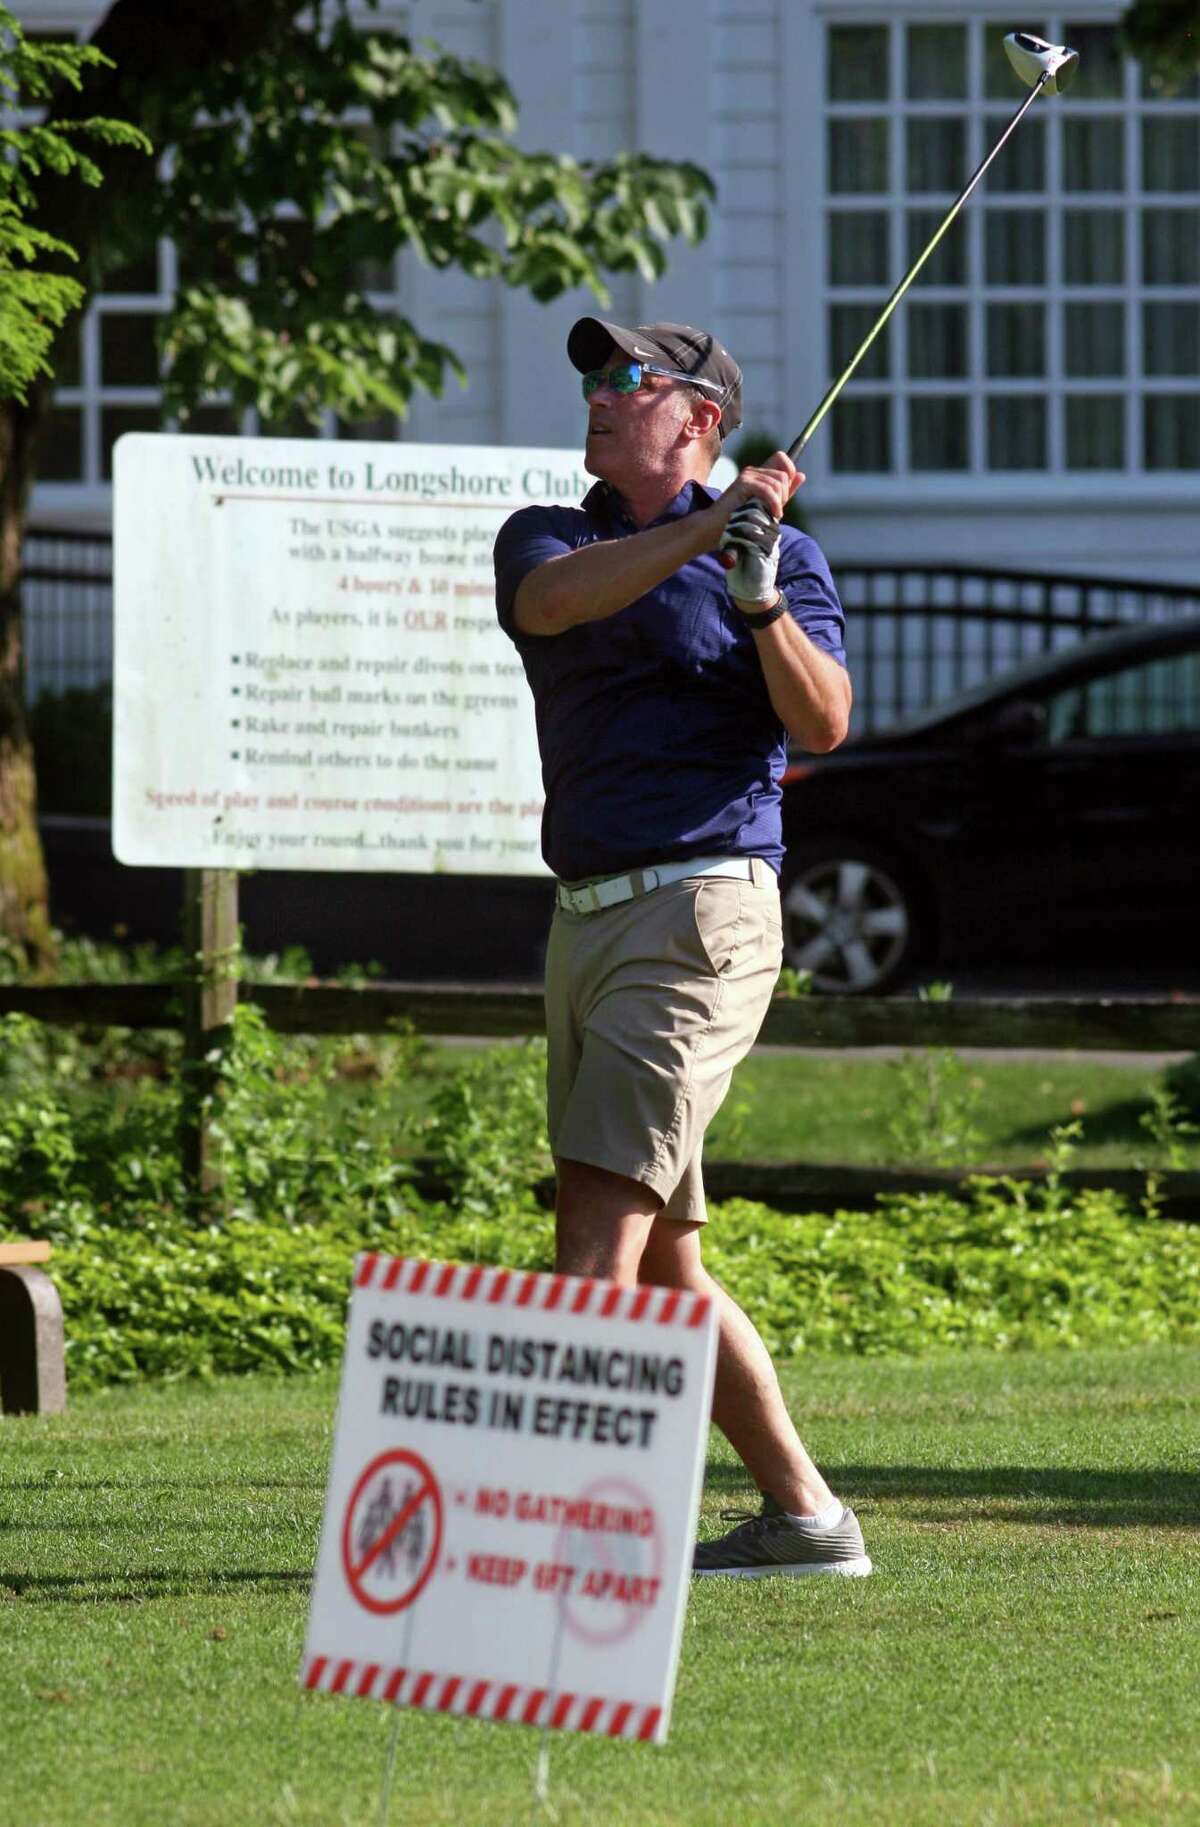 Andy Udell, of Westport, tee off on the first hole of the Longshore Golf Course in Westport, Connecticut on Tuesday, June 23, 2020.